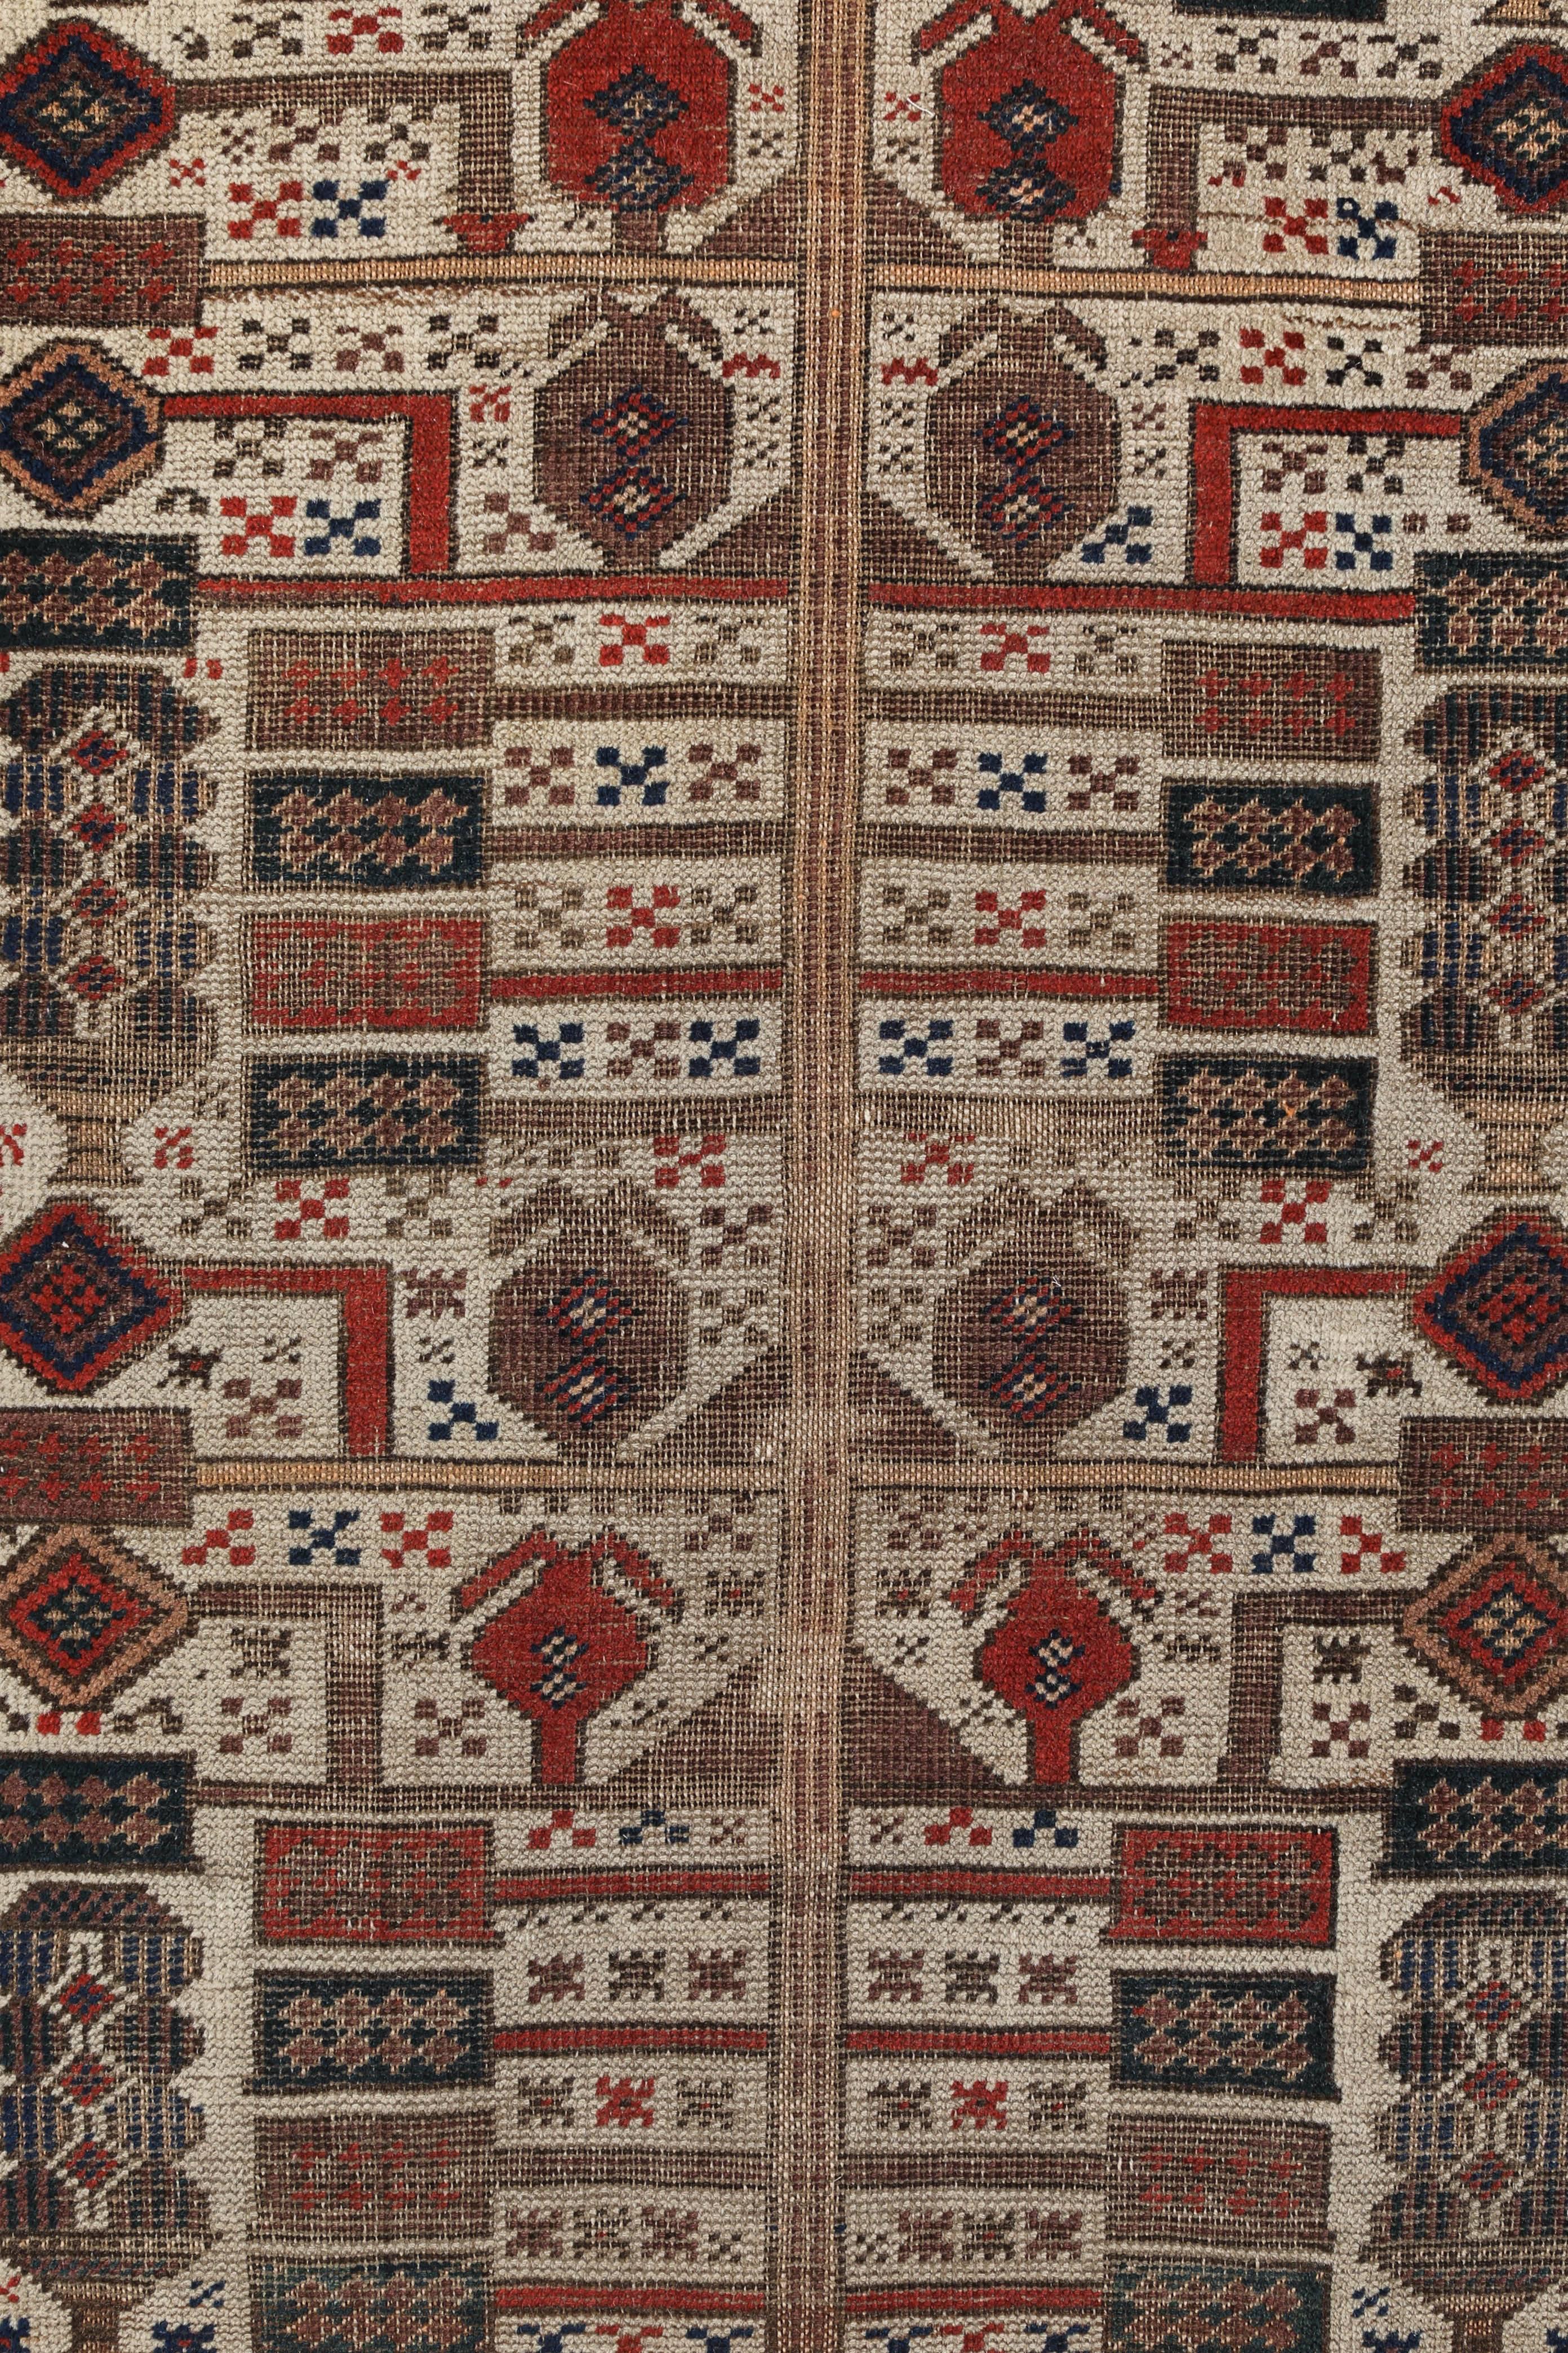 Persian tribal rug. Unusual white ground and geometric design. Hand-knotted, natural dyes. Worn pile with conserved sides and missing ends as shown.